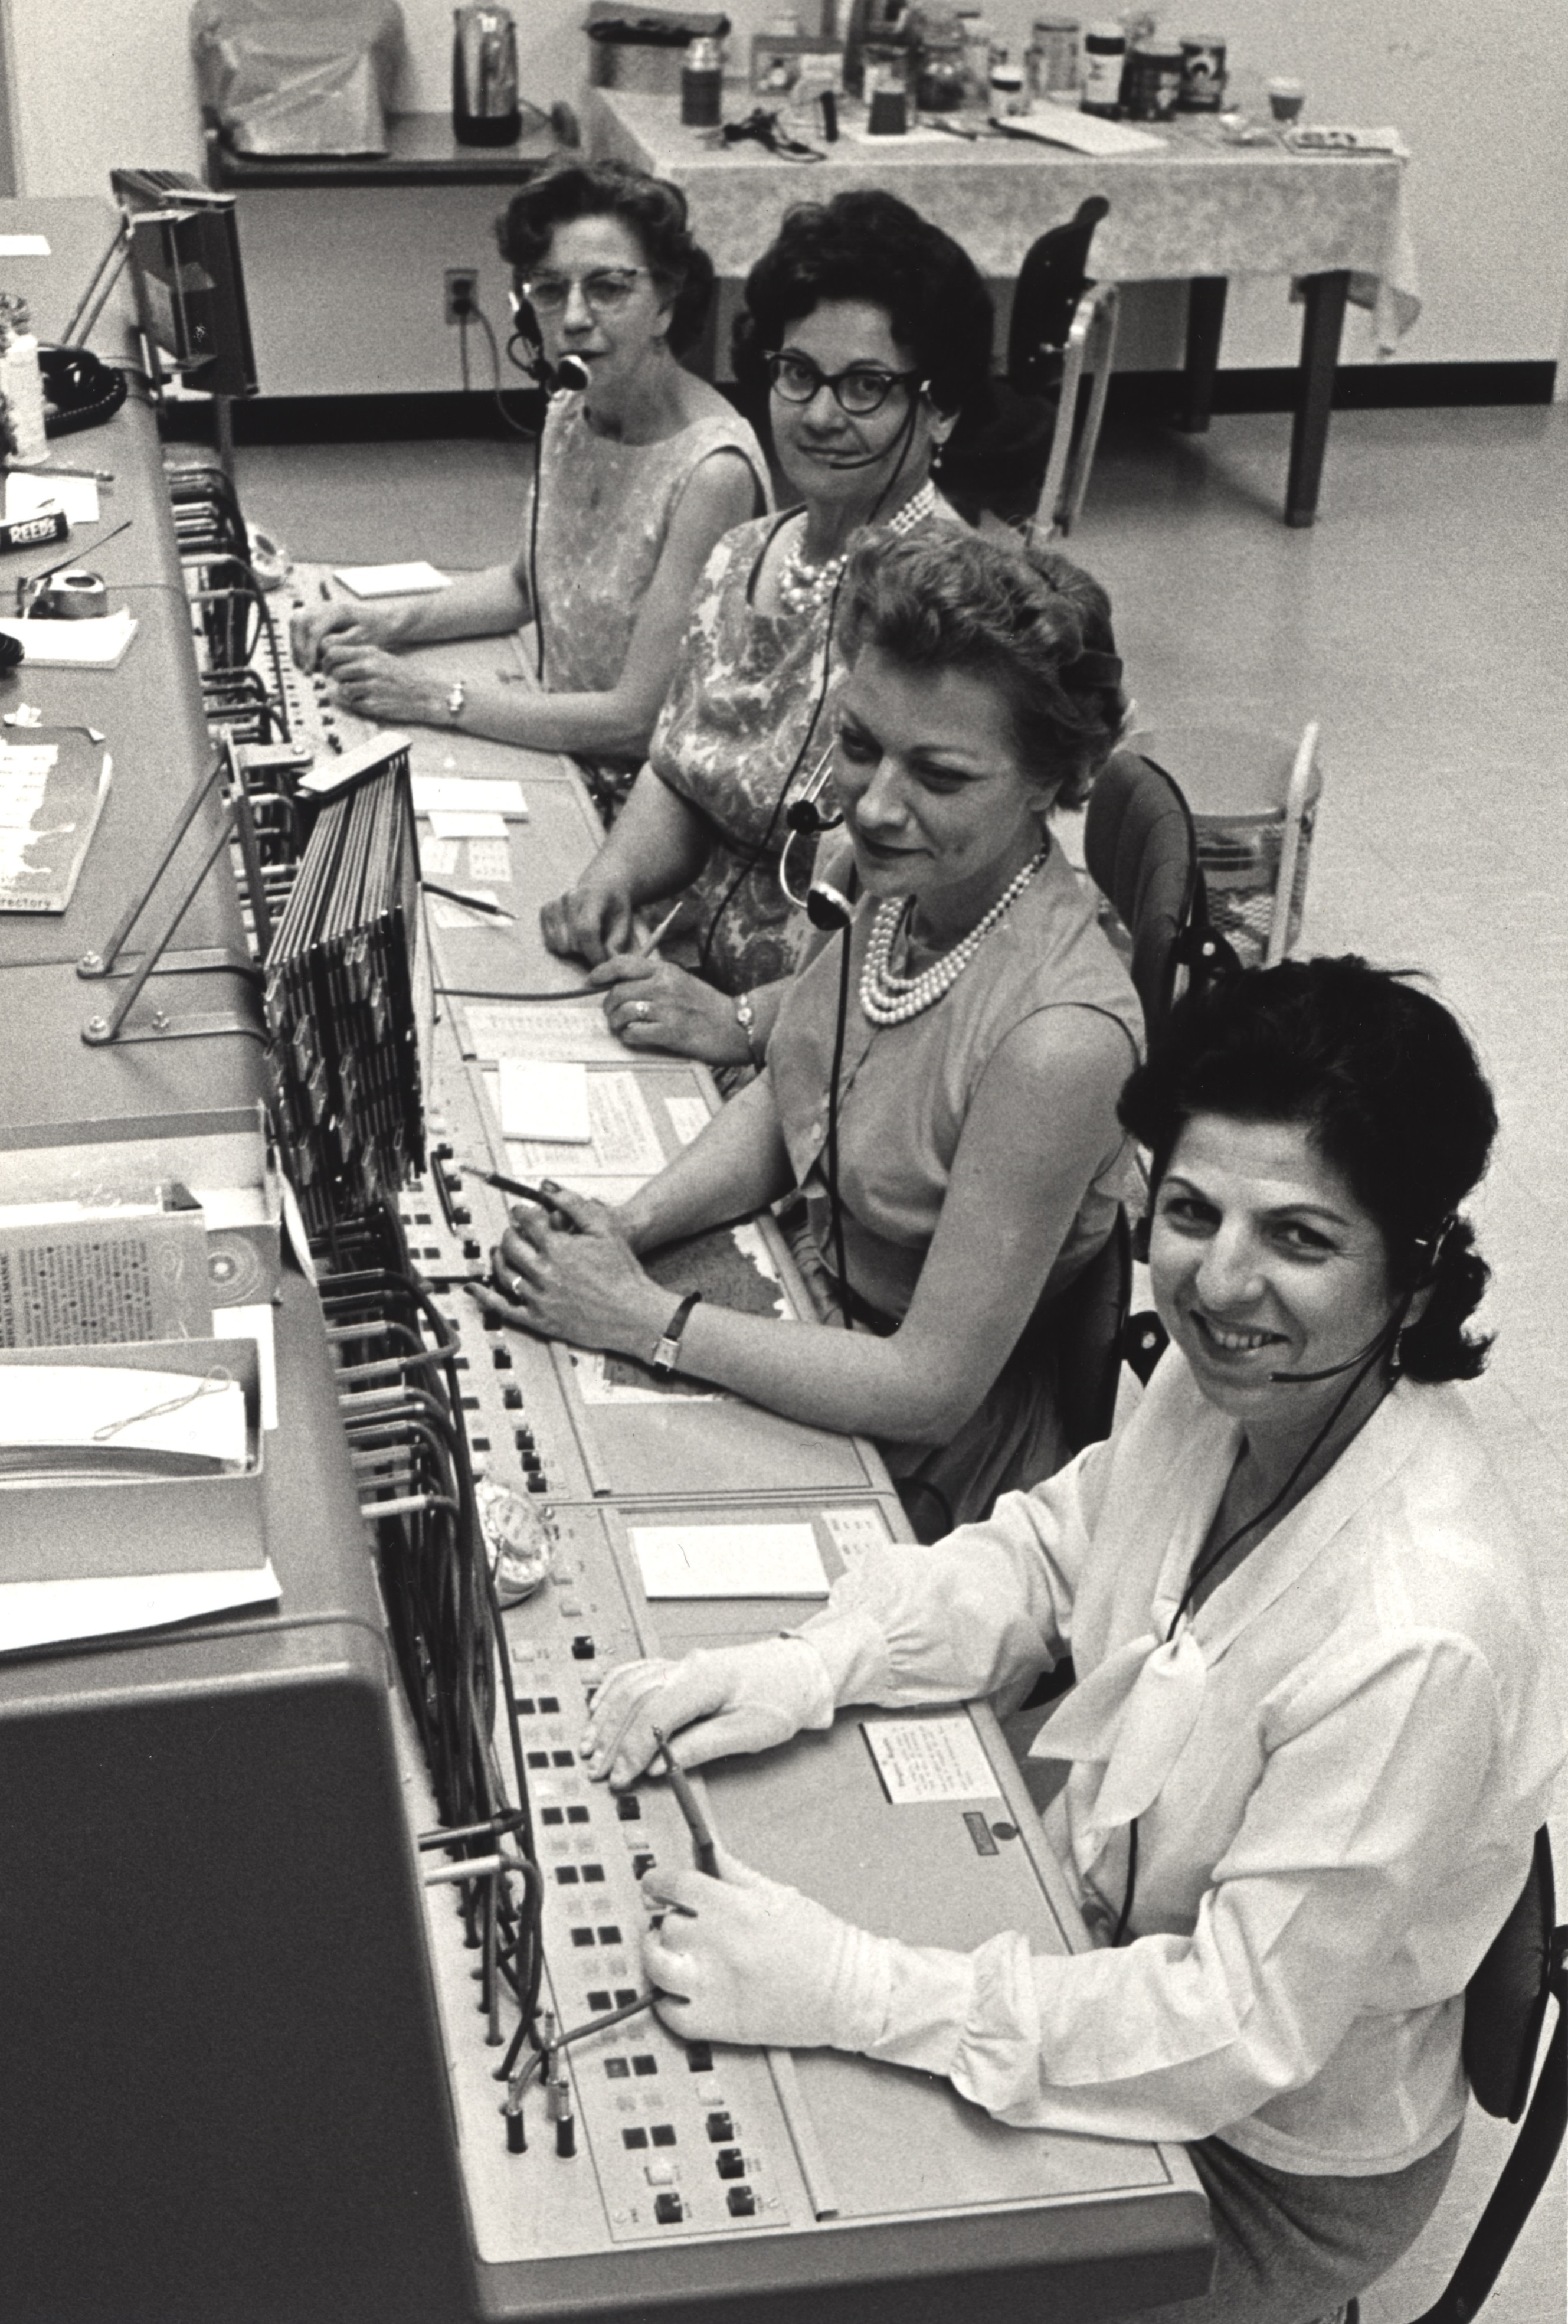 Four women sit at the NIH telephone operator exchange, looking at photographer, c. 1953